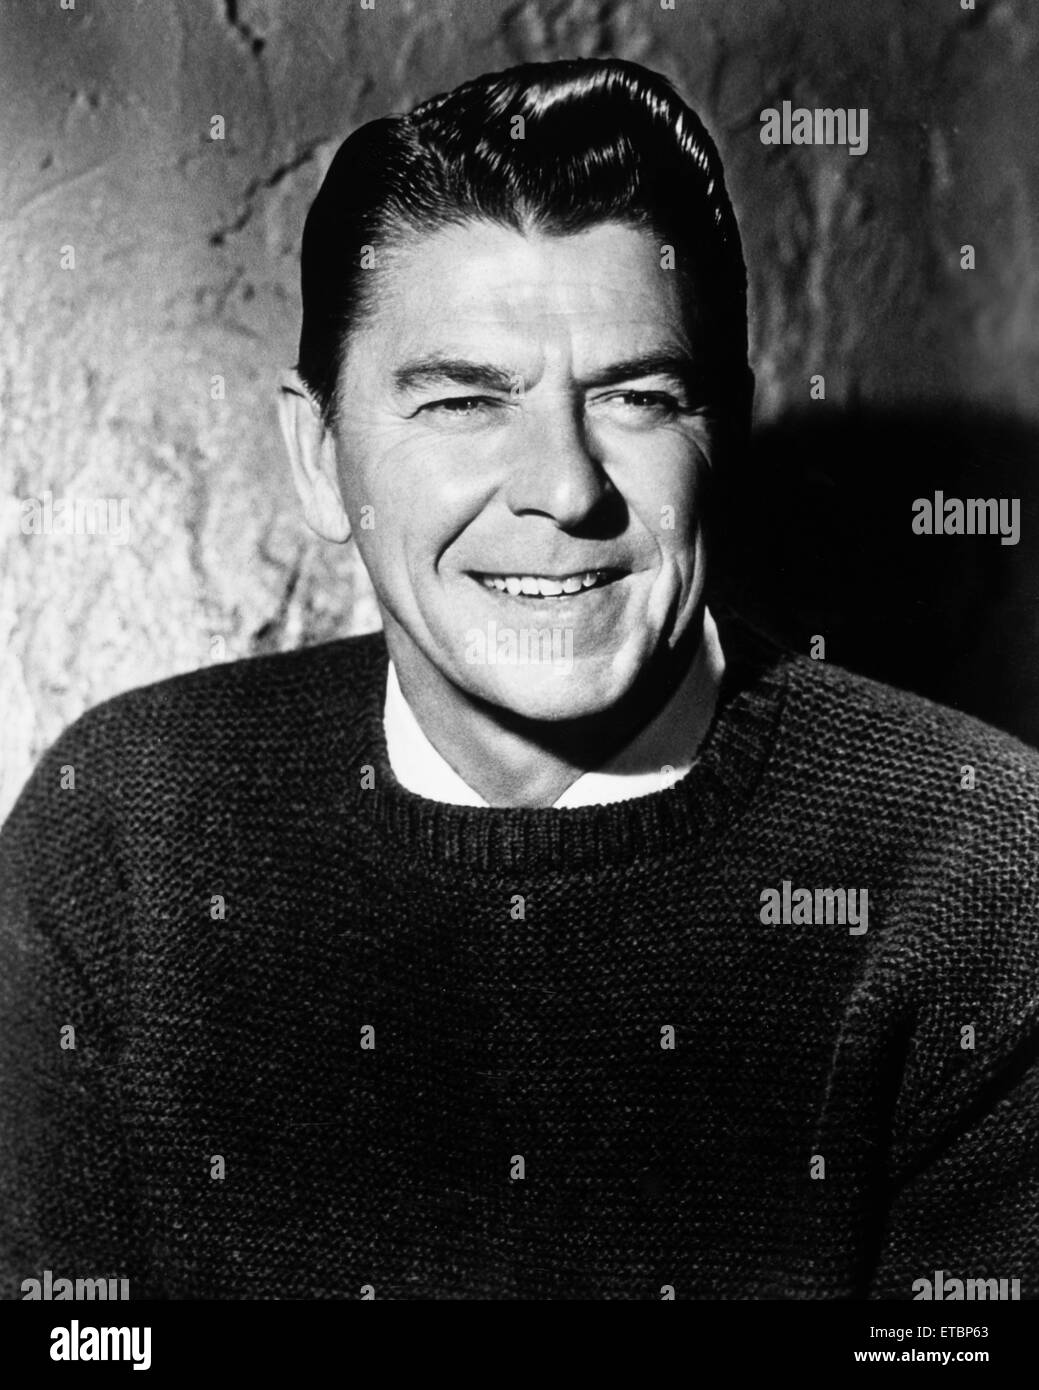 Ronald Reagan, Publicity Portrait from the Film 'The Killers', 1964 Stock Photo